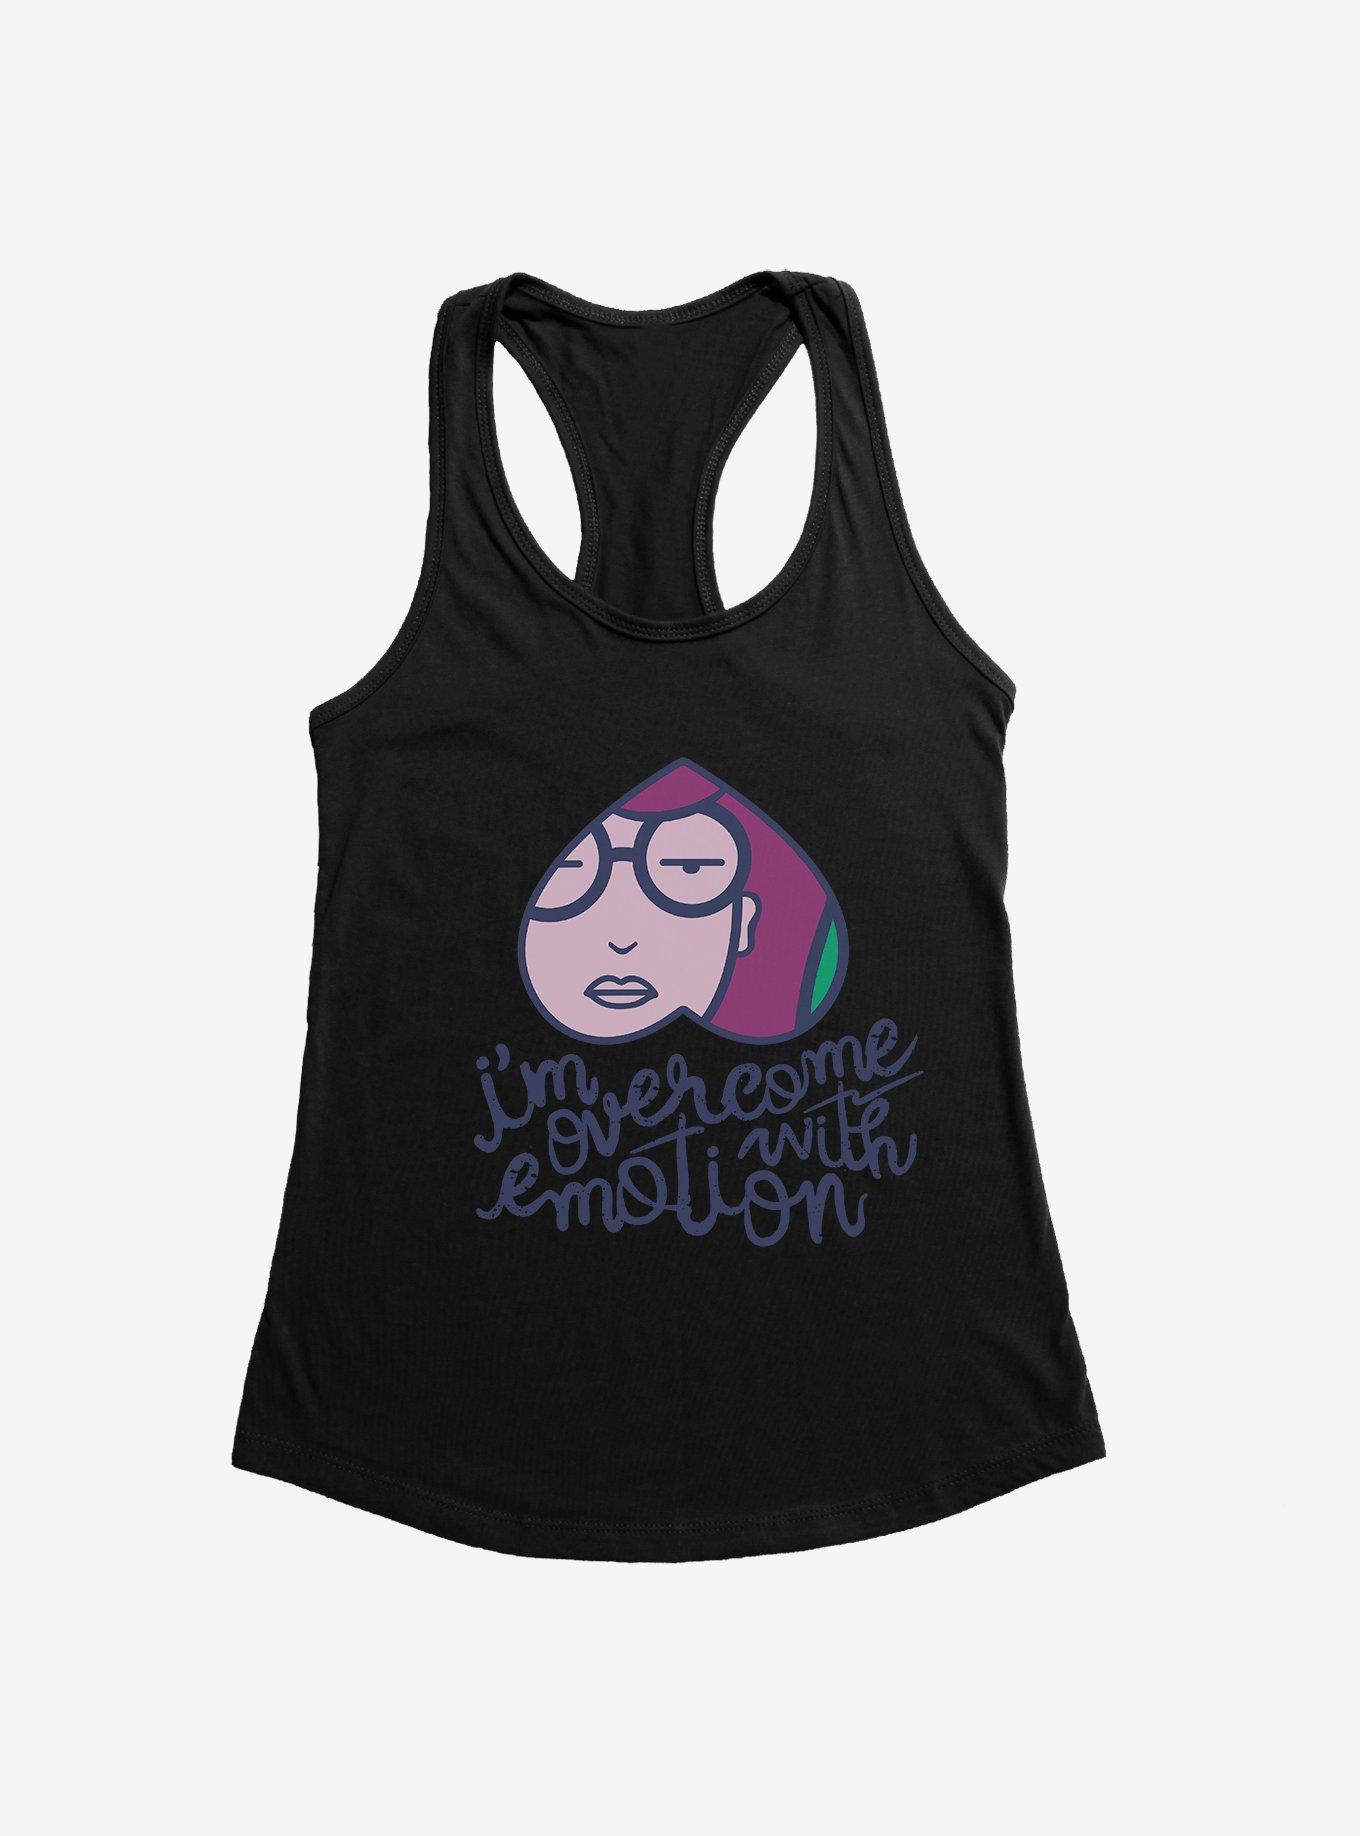 Daria Overcome with Emotion Heart Girls Tank